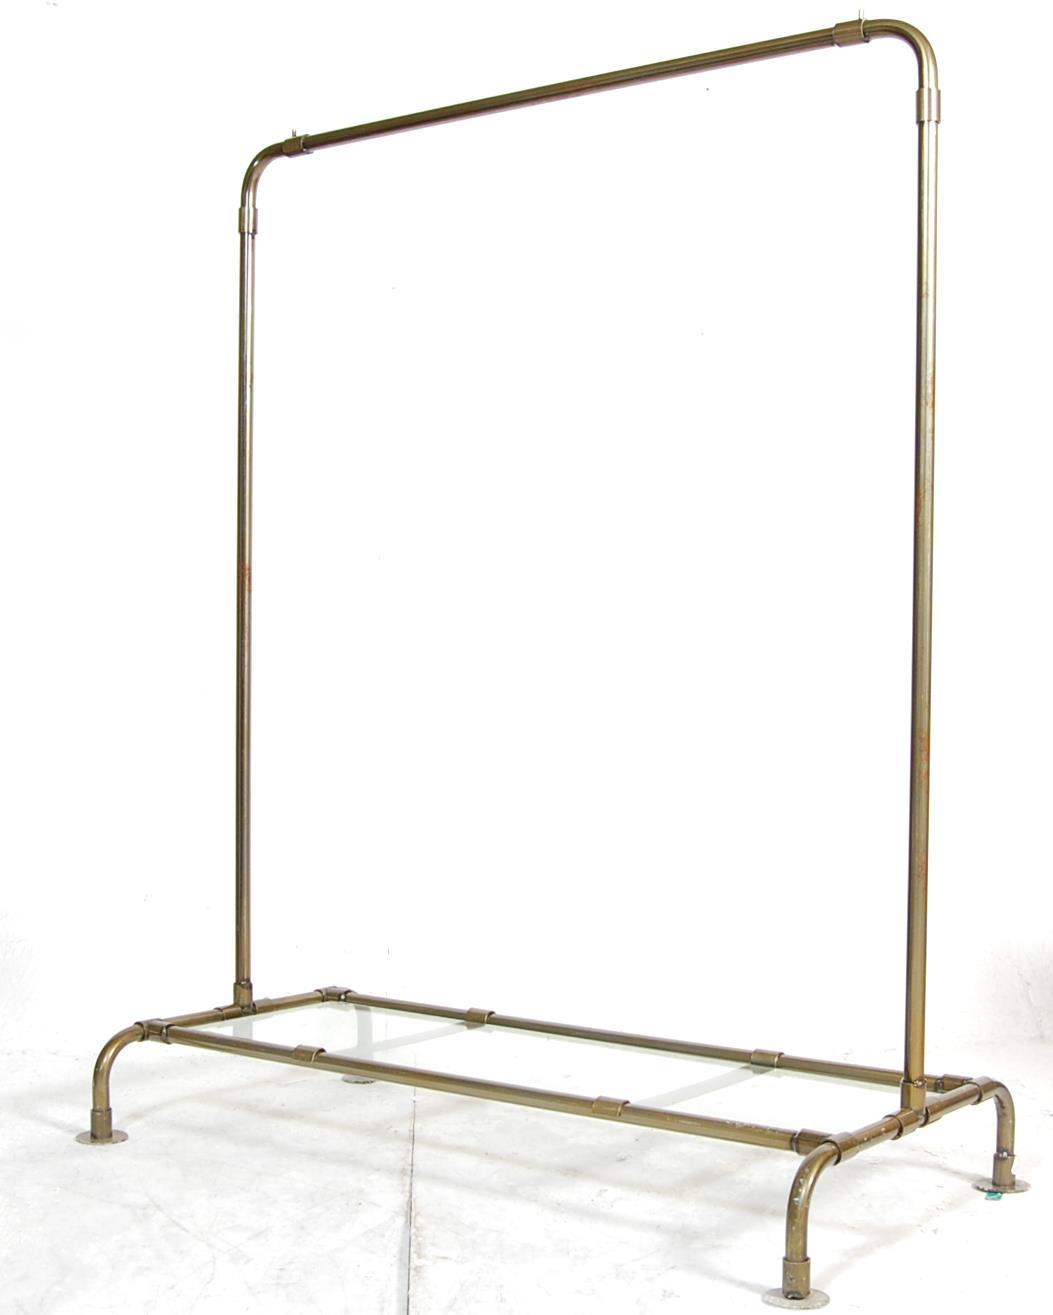 A RETRO 20TH CENTURY HABERDASHERY SHOP FLOOR STANDING CLOTHES RAIL - Image 3 of 3